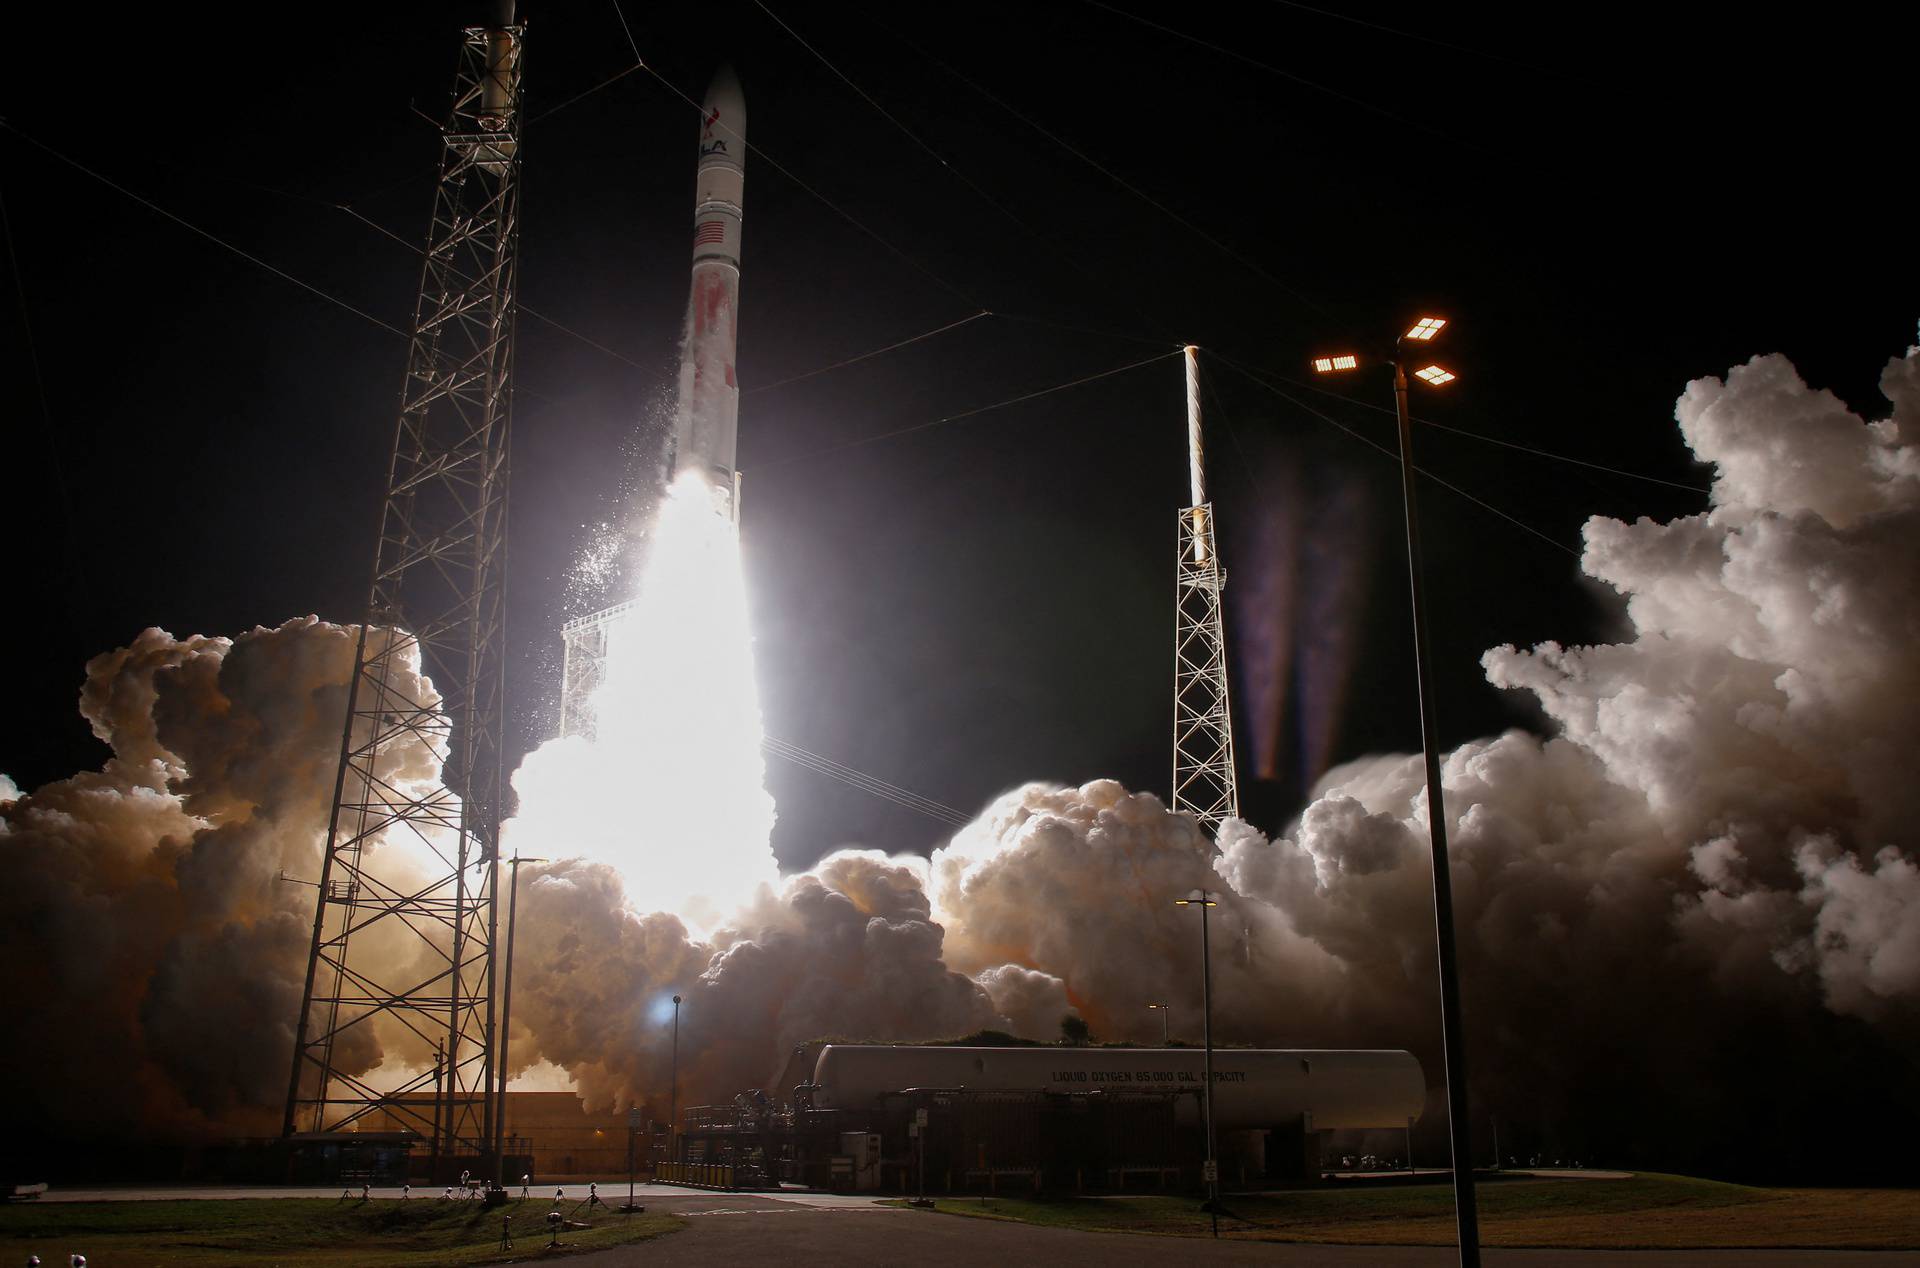 Boeing-Lockheed joint venture United Launch Alliance’s next-generation Vulcan rocket is launched on its debut flight from Cape Canaveral